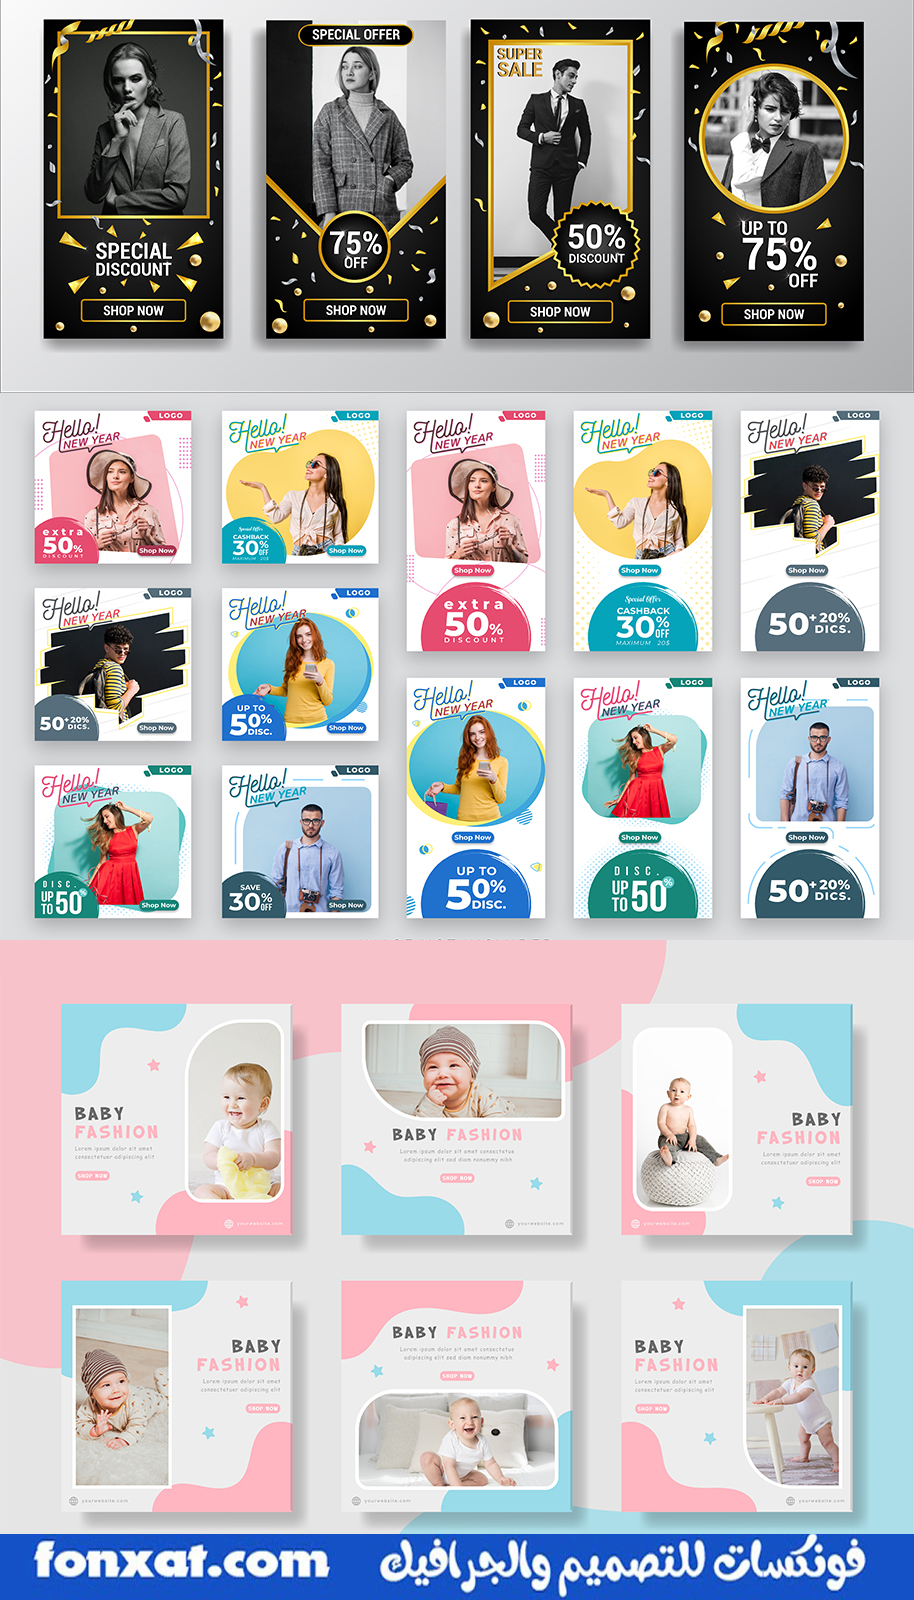 Download bundle for kids social, fashion and clothing banners in PSD - EPS vector format